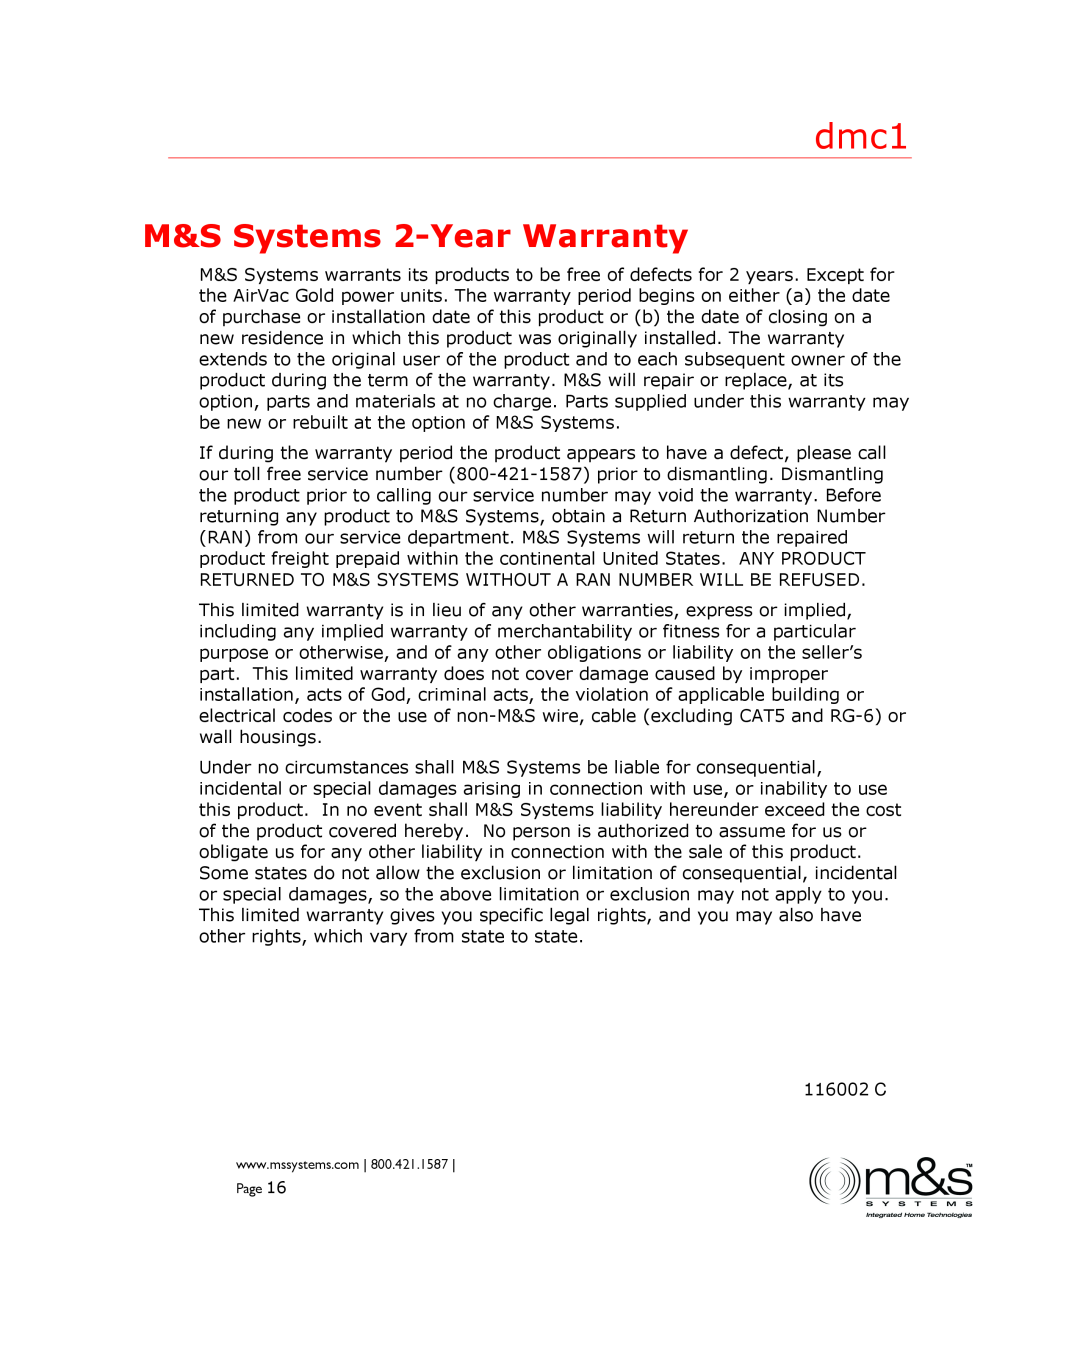 M&S Systems dmc1 manual M&S Systems 2-Year Warranty 